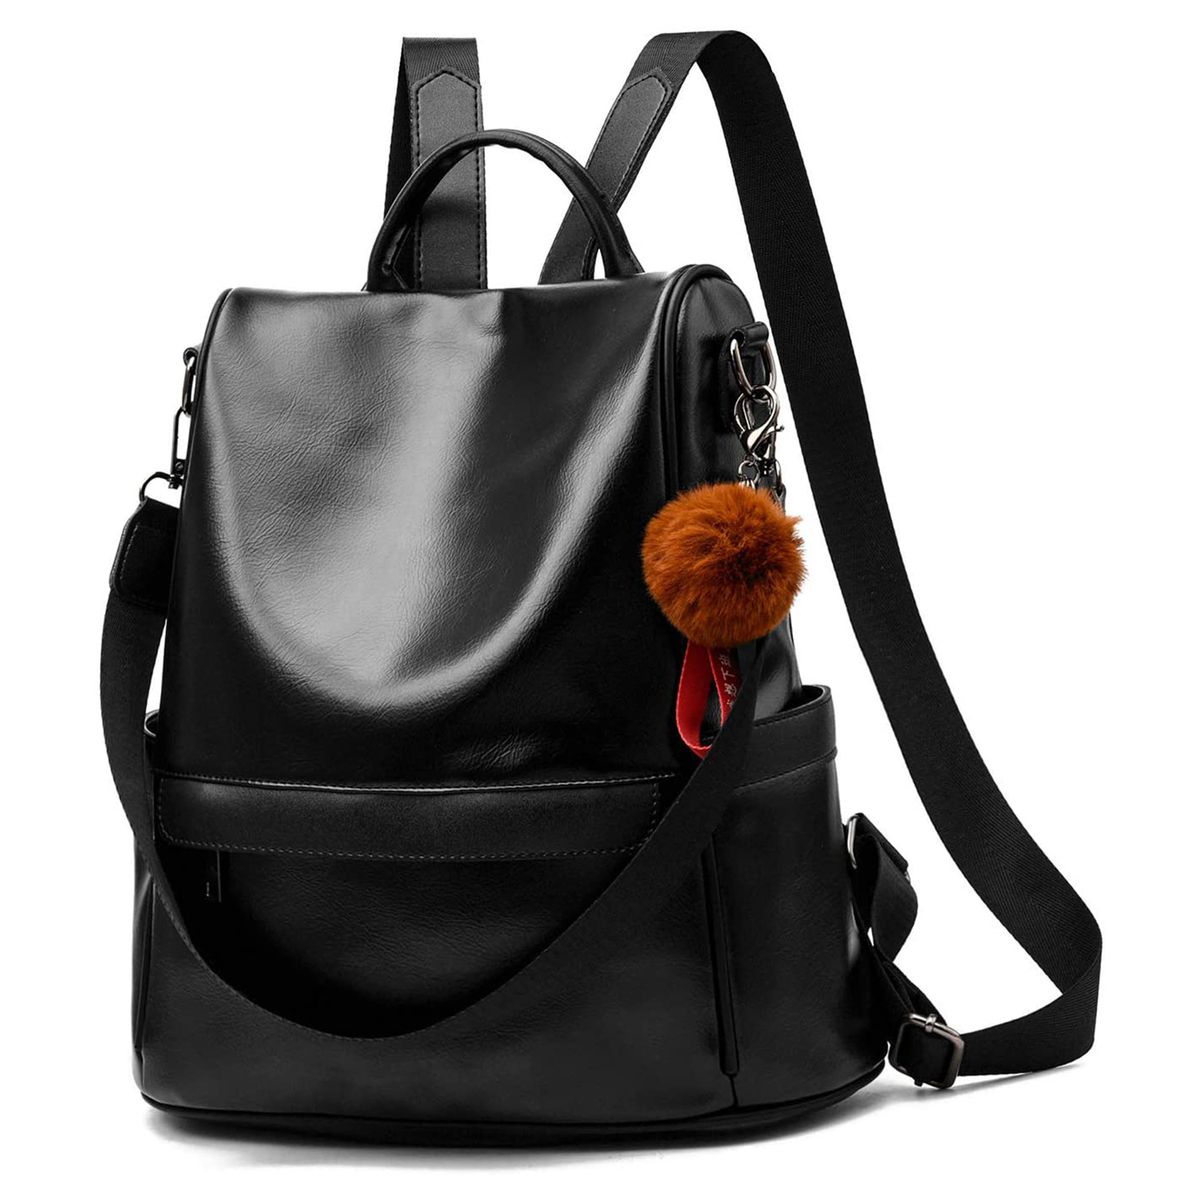 Soft Leather Backpack for Women Antitheft Ladies Waterproof Fashion Travel Rucks 